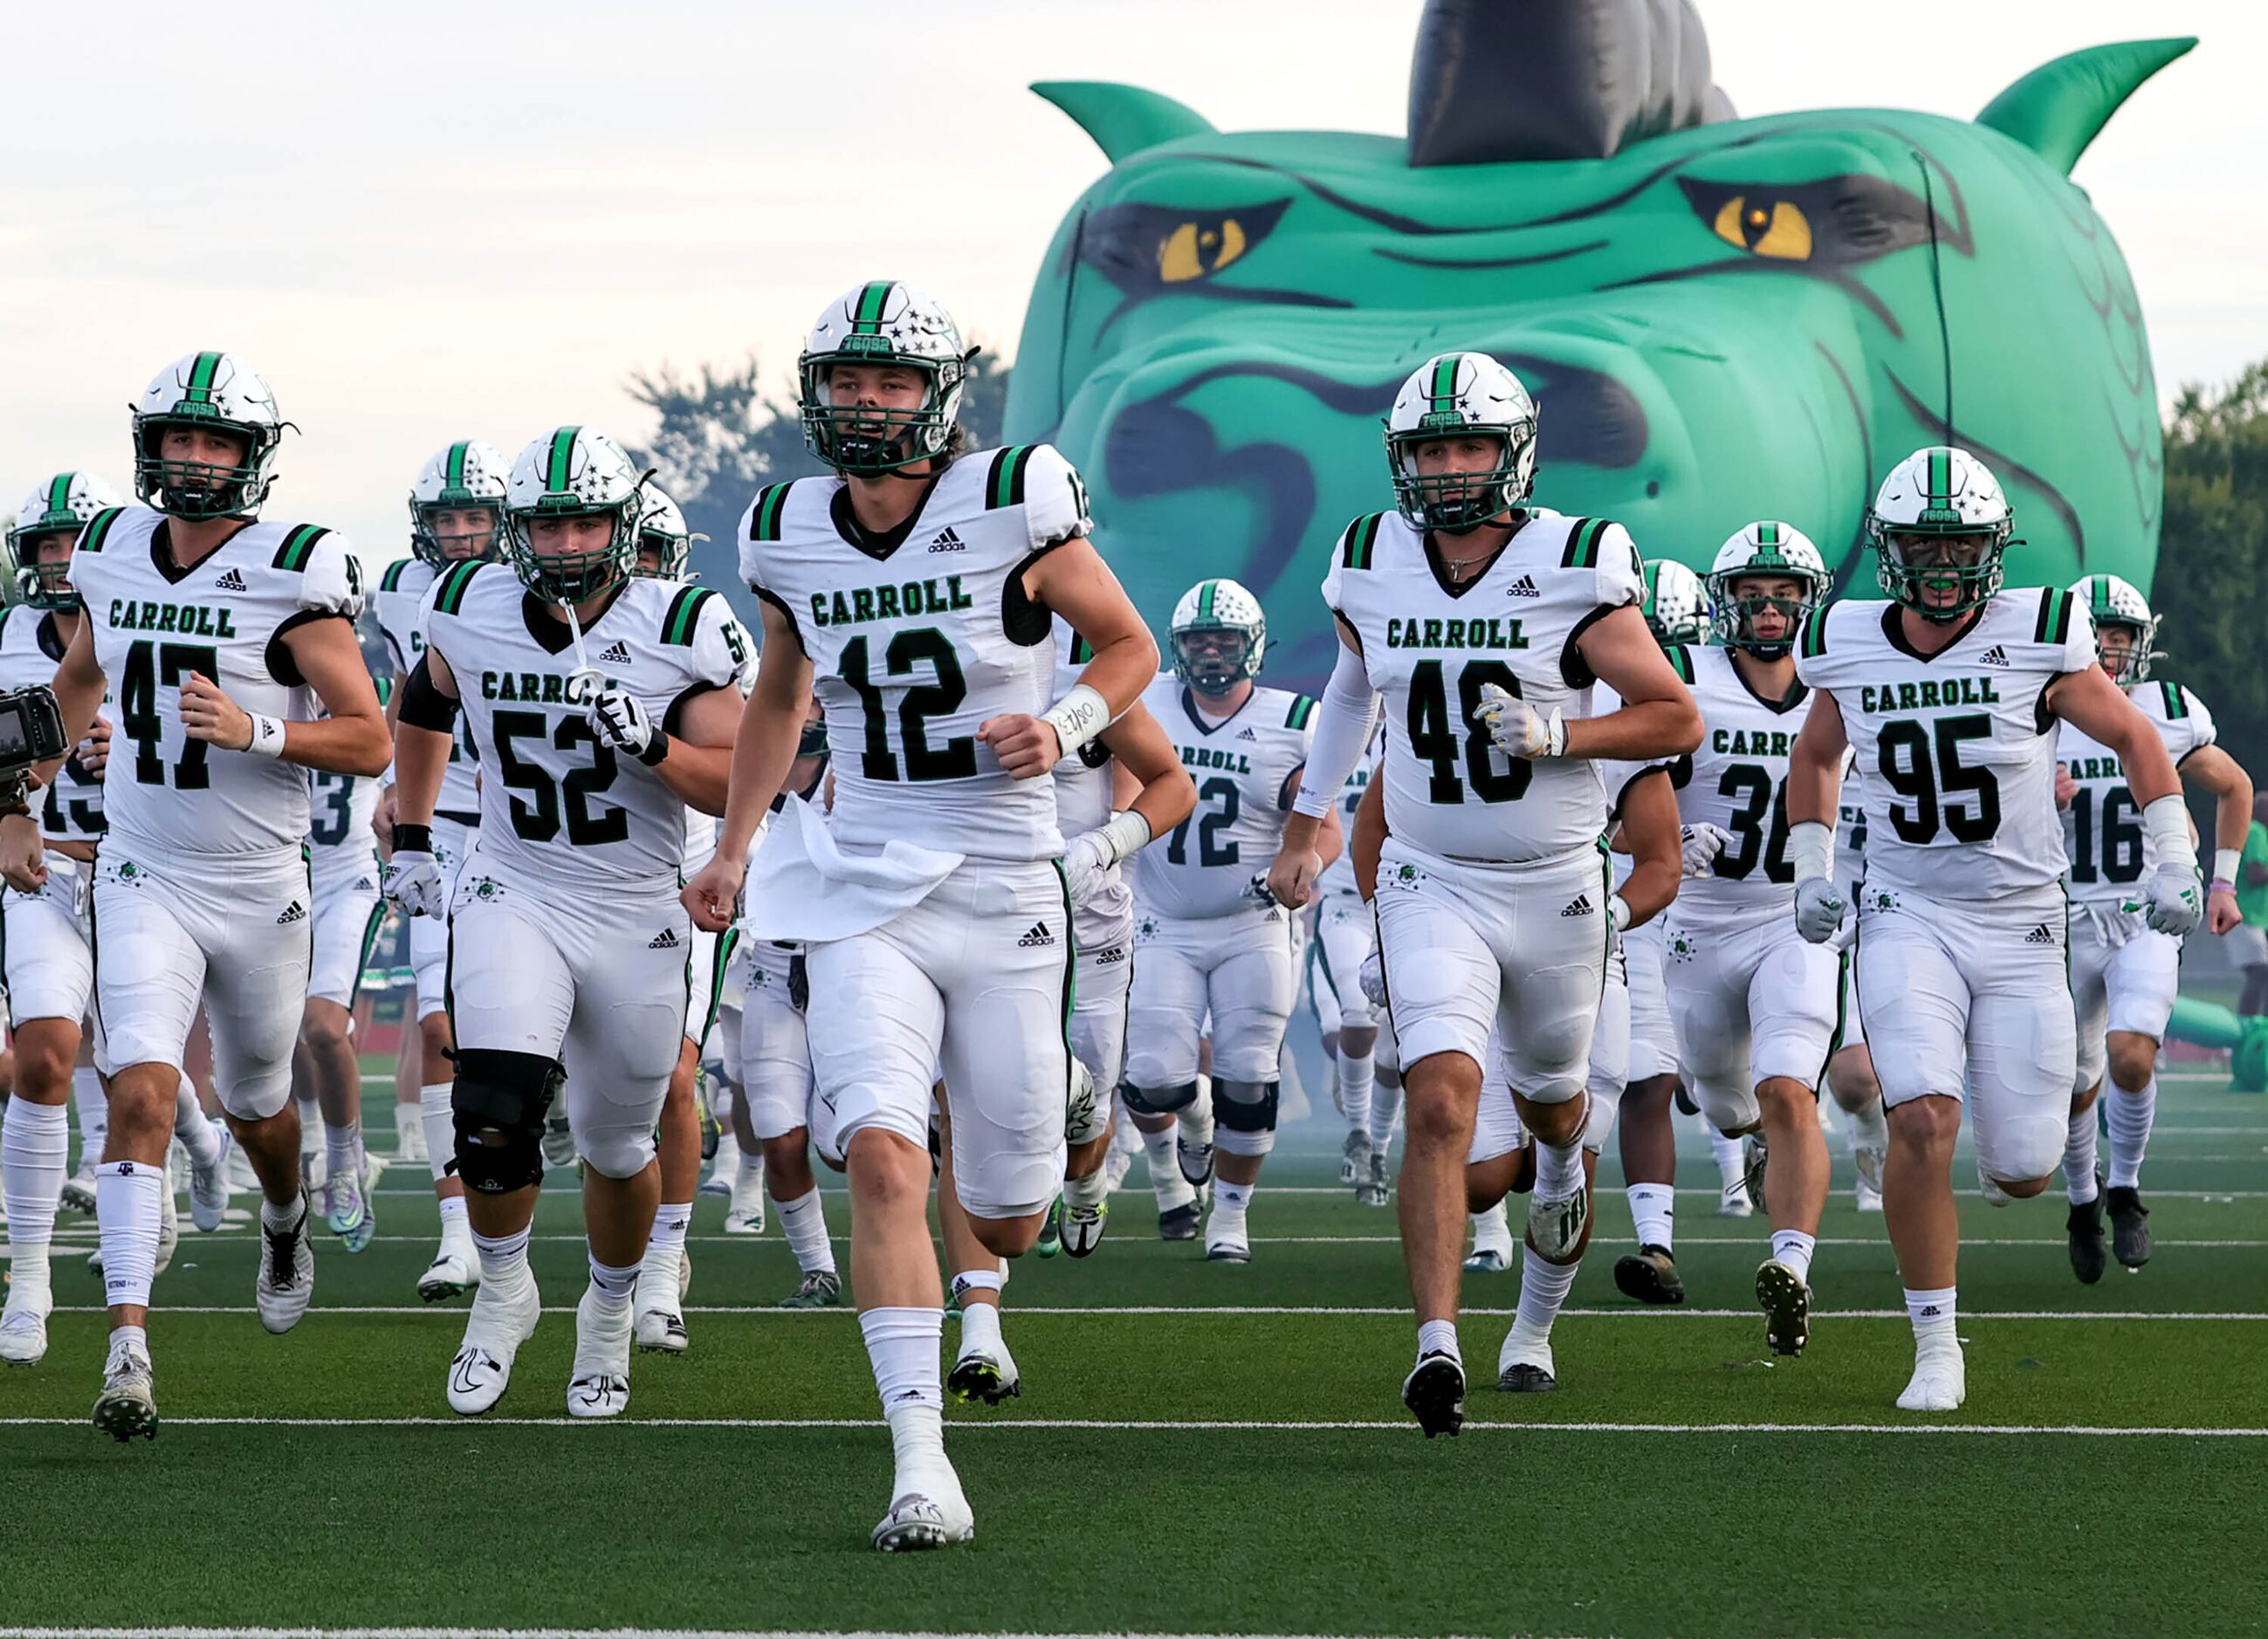 The Southlake Carroll Dragons enter the field to face Flower Mound Marcus in a high school...